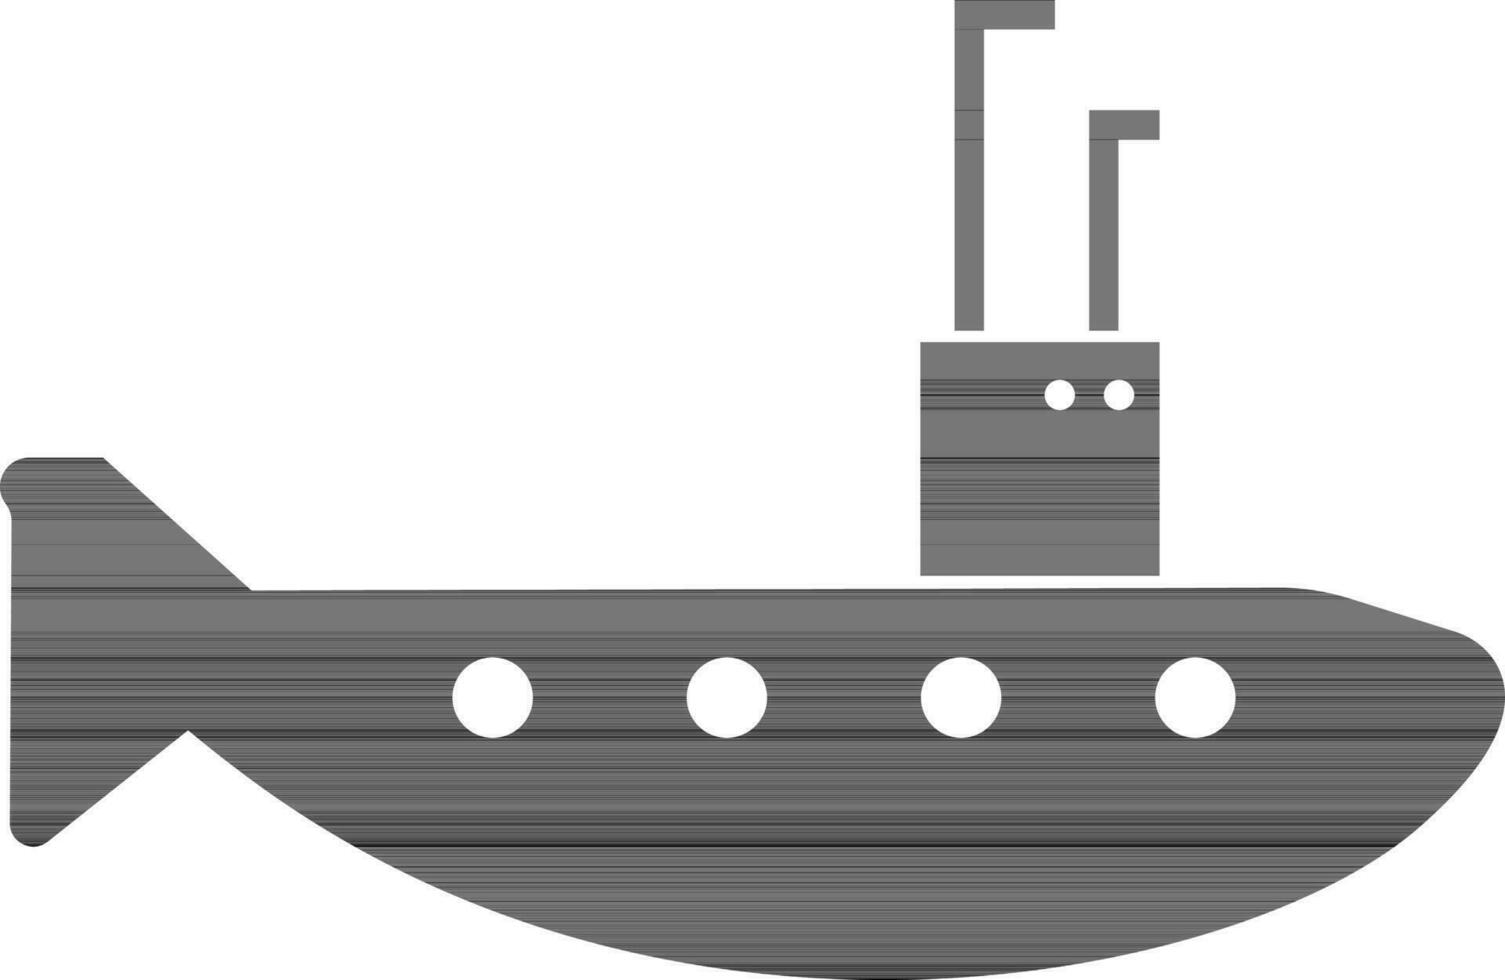 Submarine in black and white color. vector